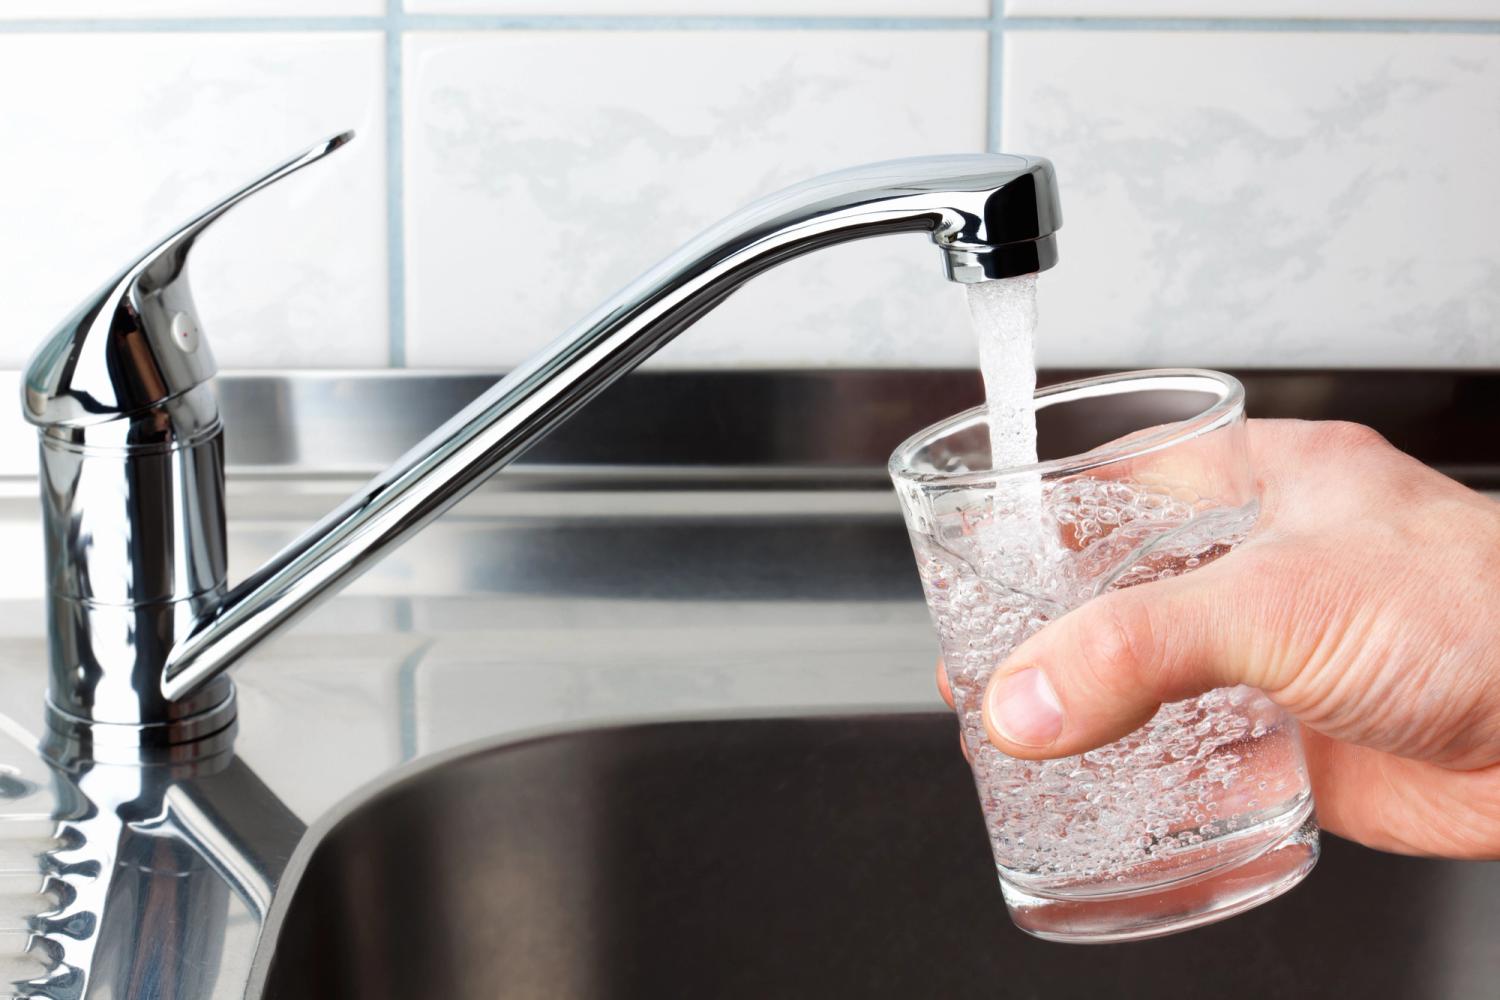 Photo of someone filling a small glass with tap water. Image sourced from shutterstock.